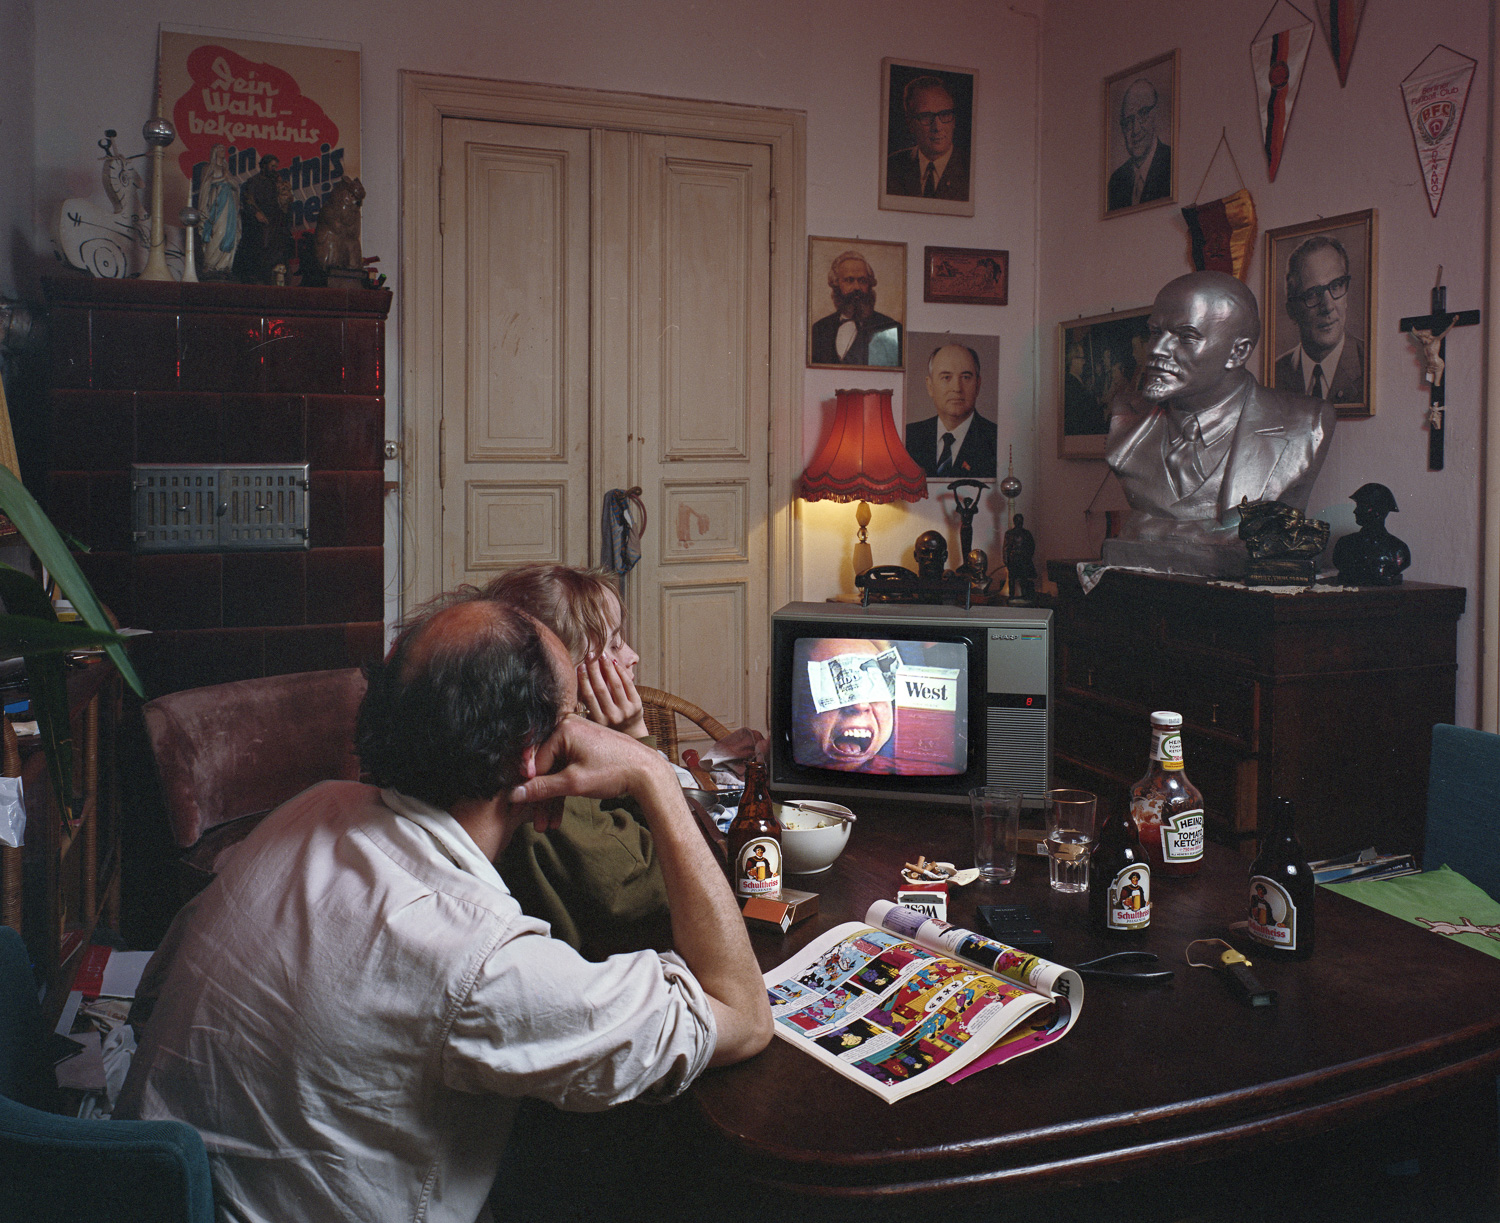    
  
 
  
    Of course, this is a set up. The montage on the television refers to the "Go wild west" slogan attached to the cigarette brand, the man with the money pasted to his forehead is an illustration from a magazine article discussing the ec